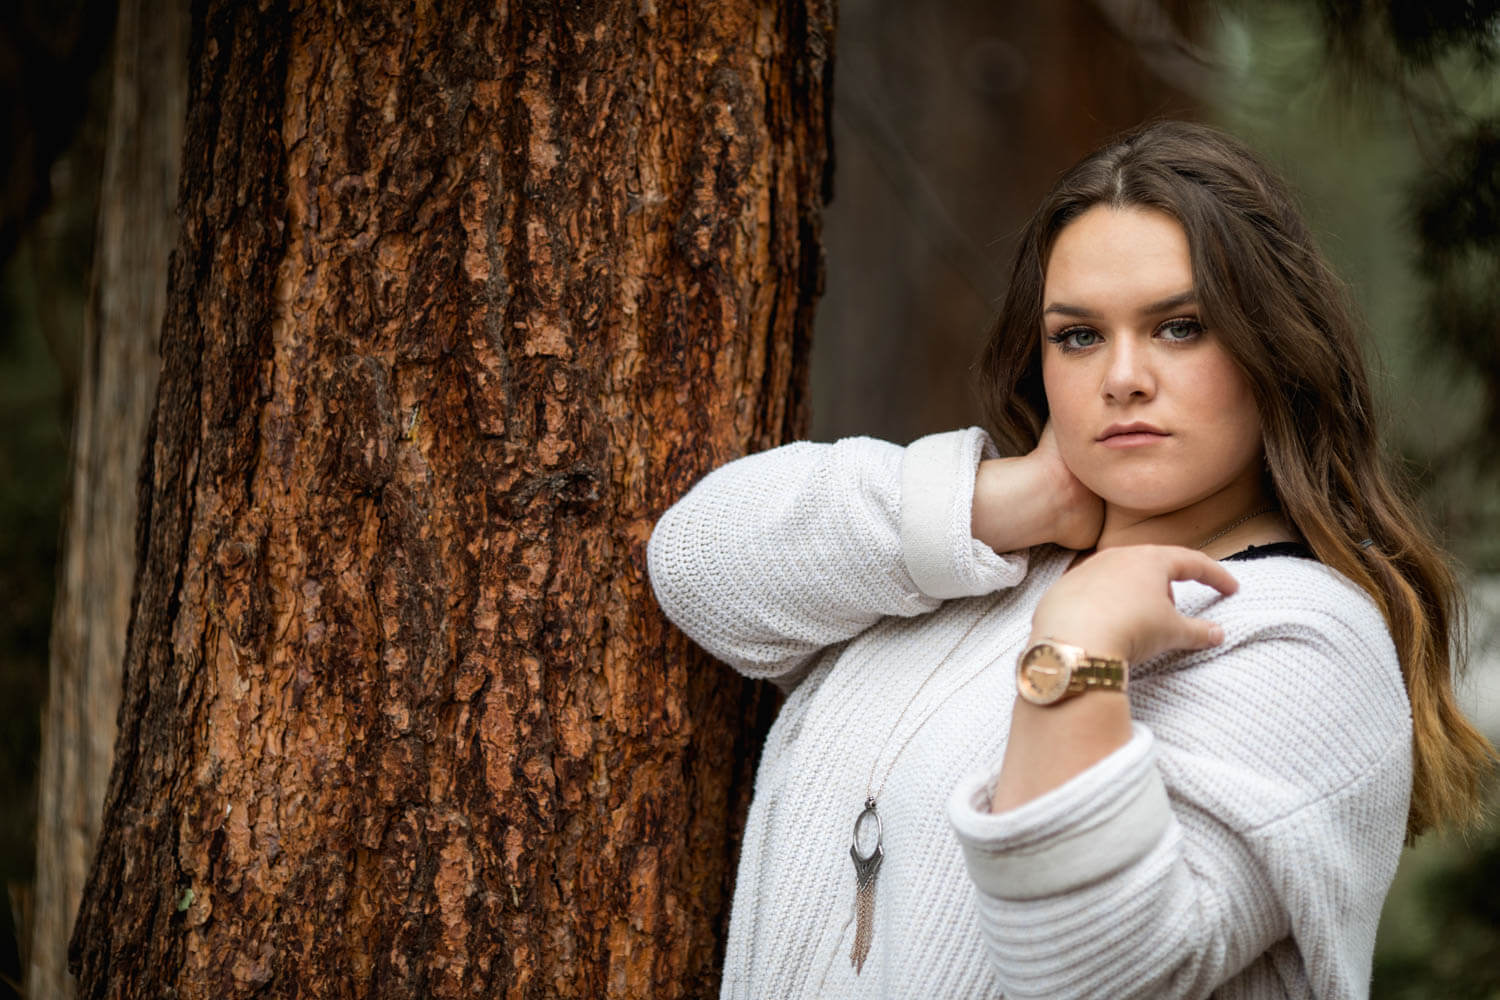 Senior picture of a girl leaning against tree trunk.